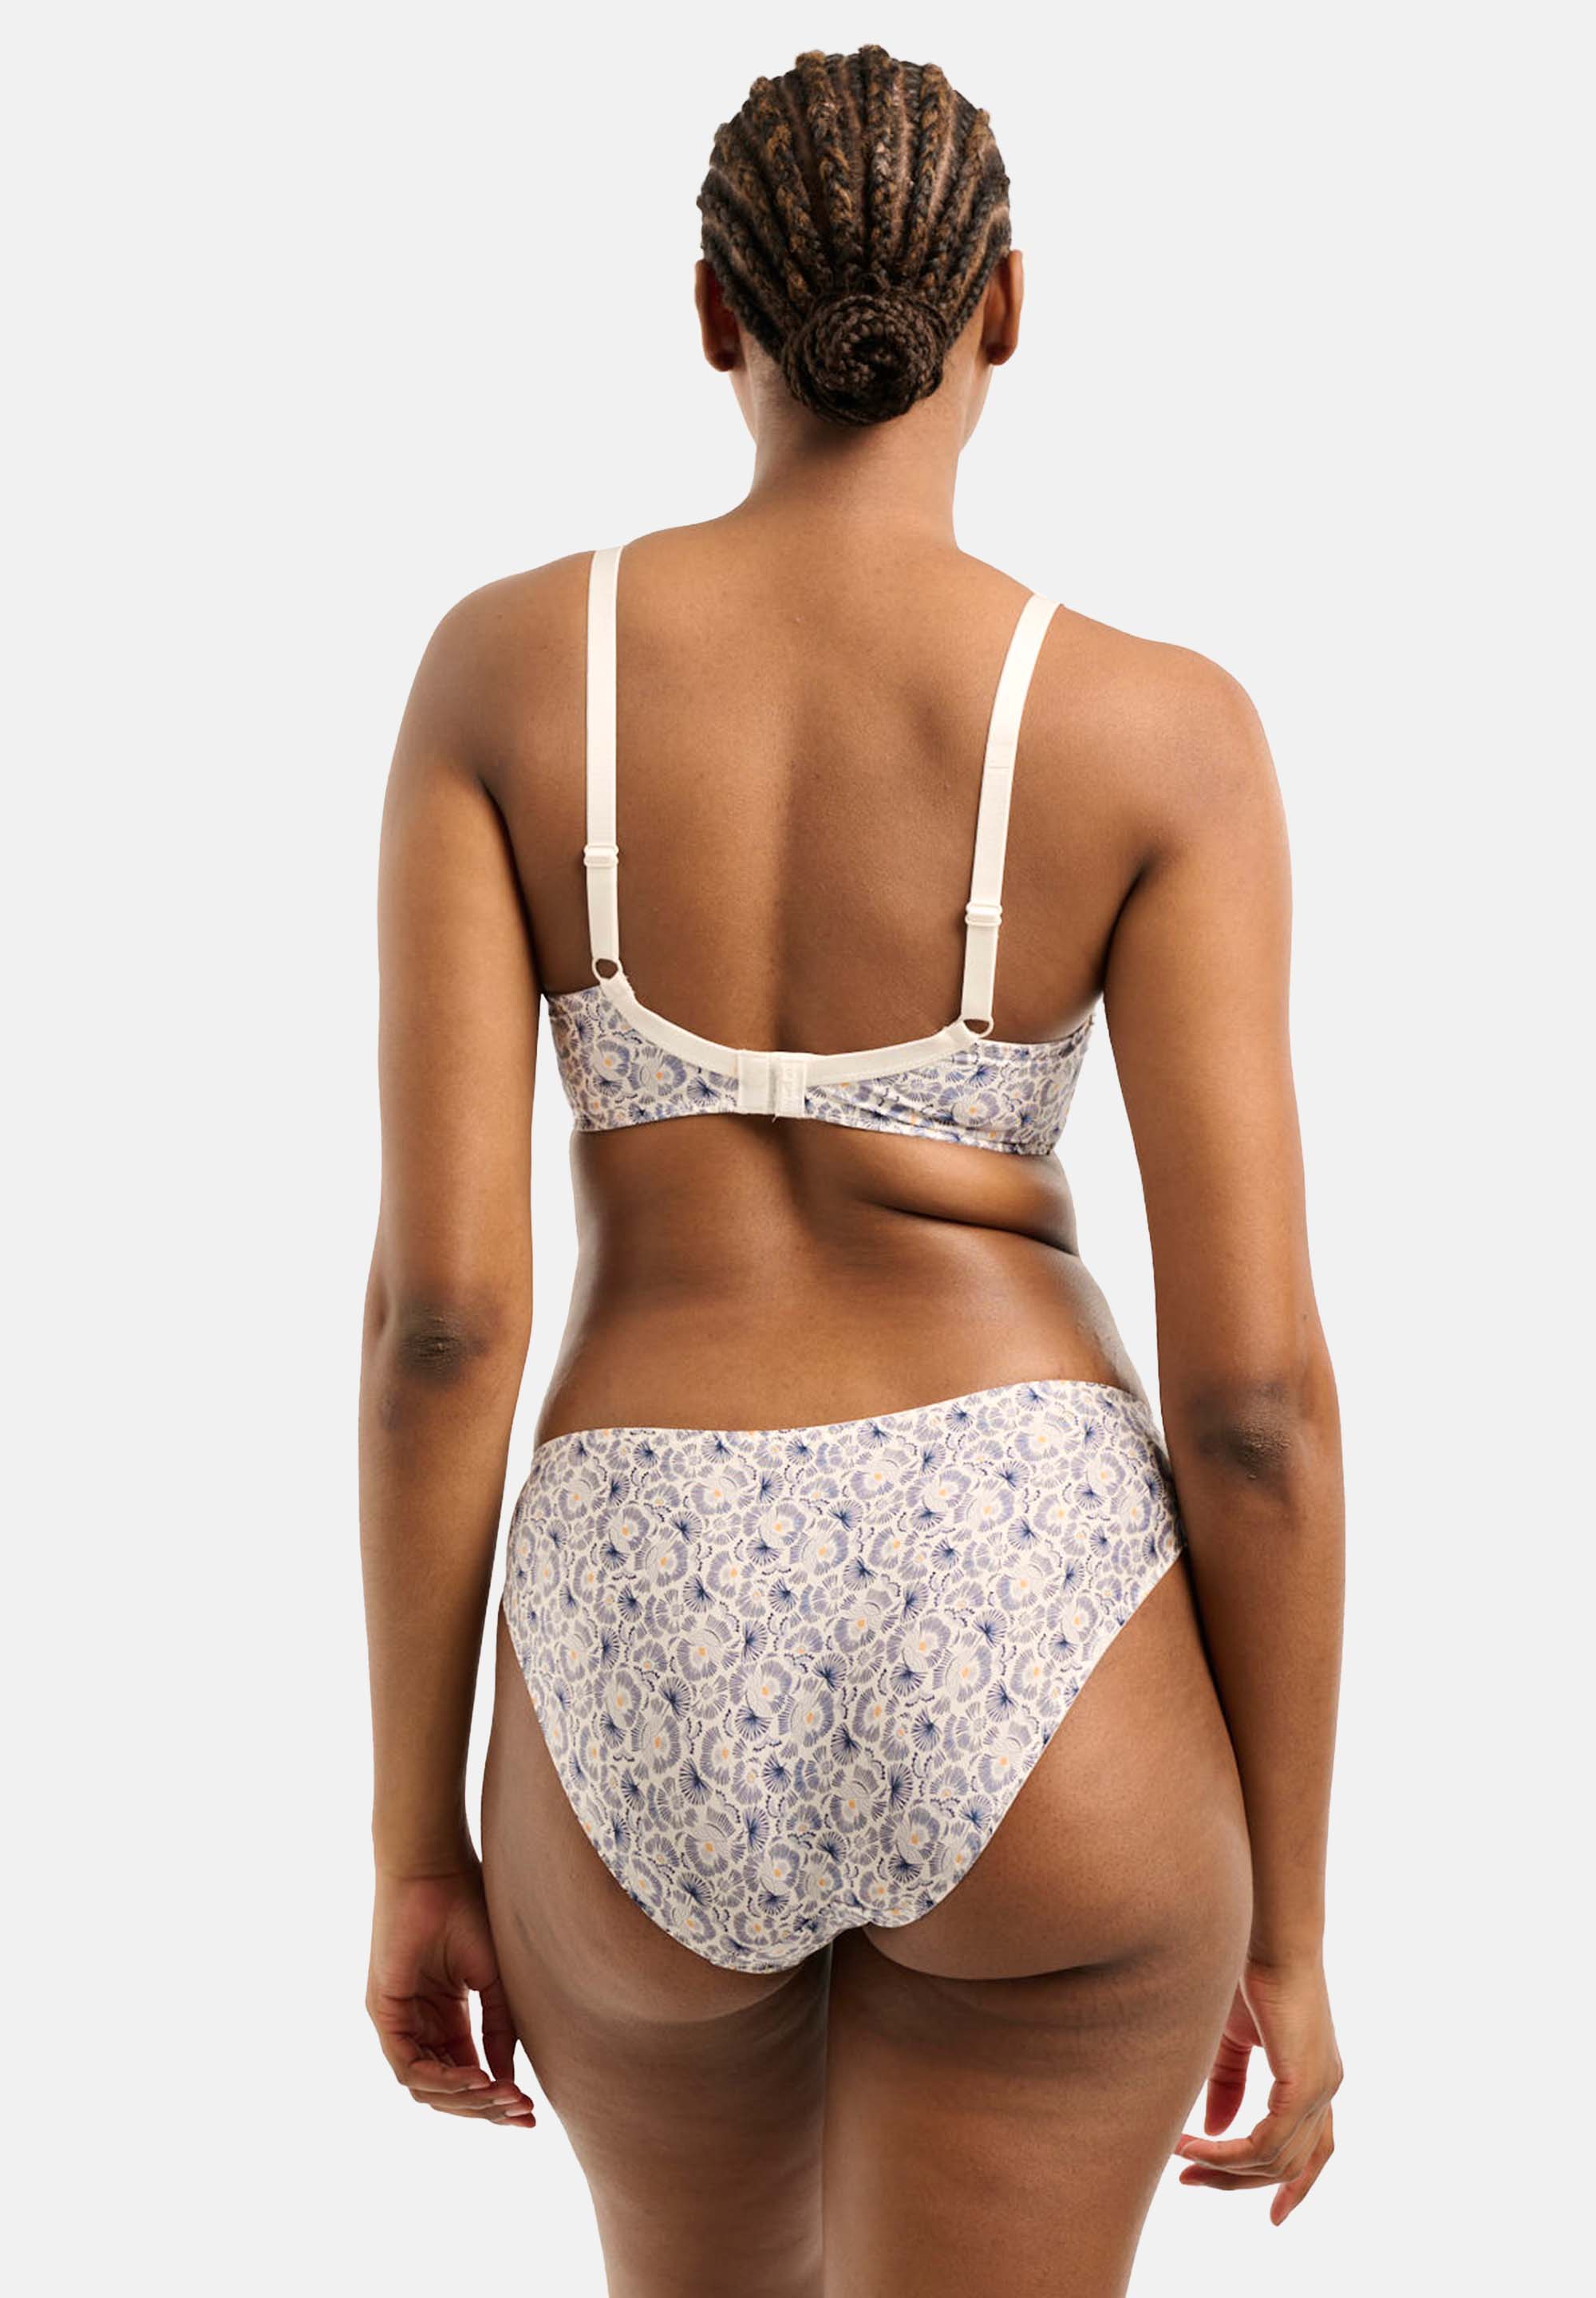 Full Cup Bra Complice Ivory & Blue Floral Print